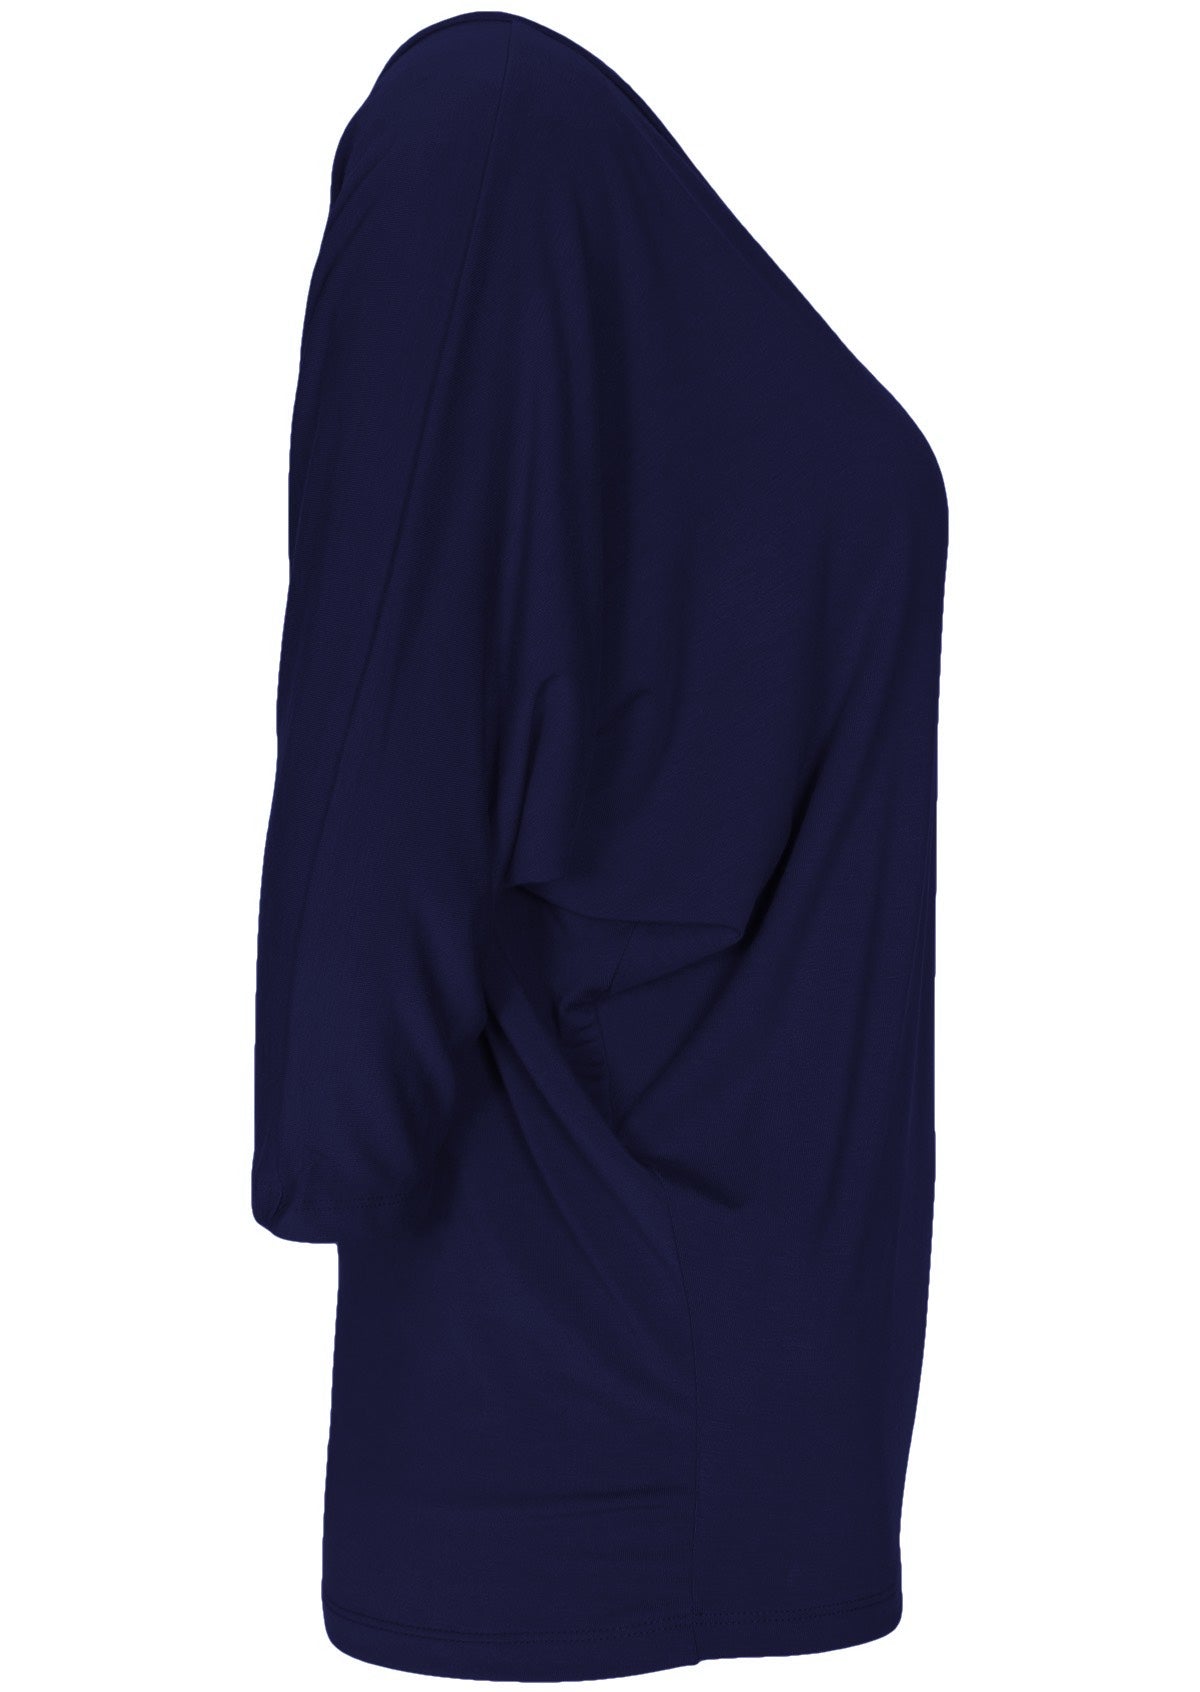 Side view of women's 3/4 sleeve rayon batwing v-neck navy blue top.